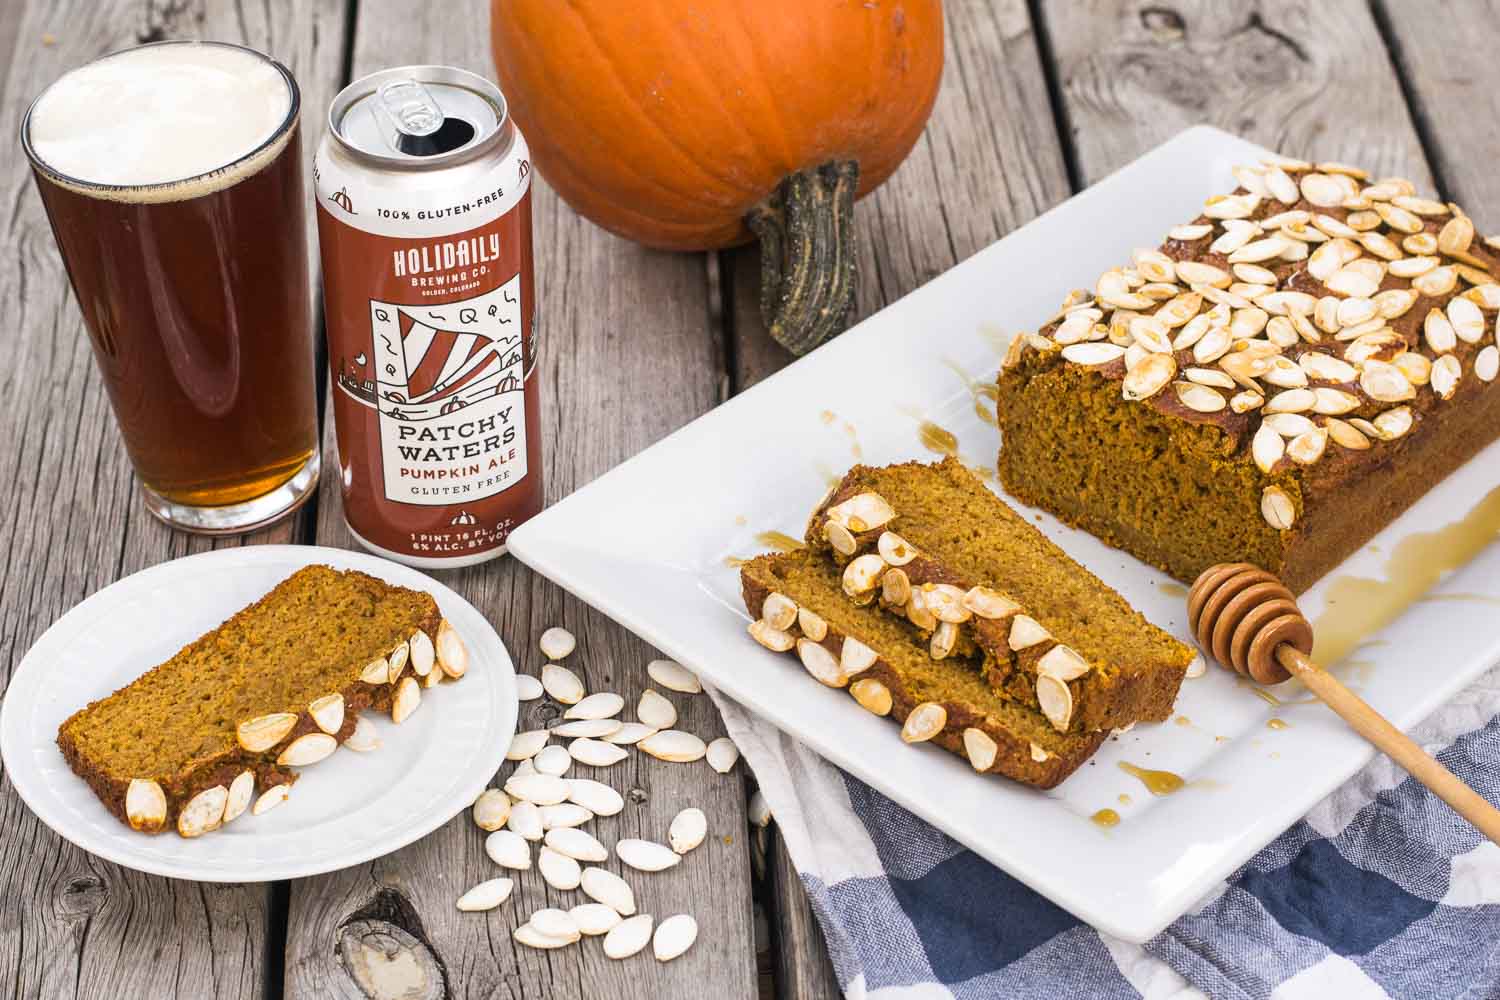 Celebrating Great American Beer Festival with craft beer recipes from Golden, Colorado! Let's spice up gluten-free beer bread with pumpkin, maple syrup, & cinnamon to welcome fall.